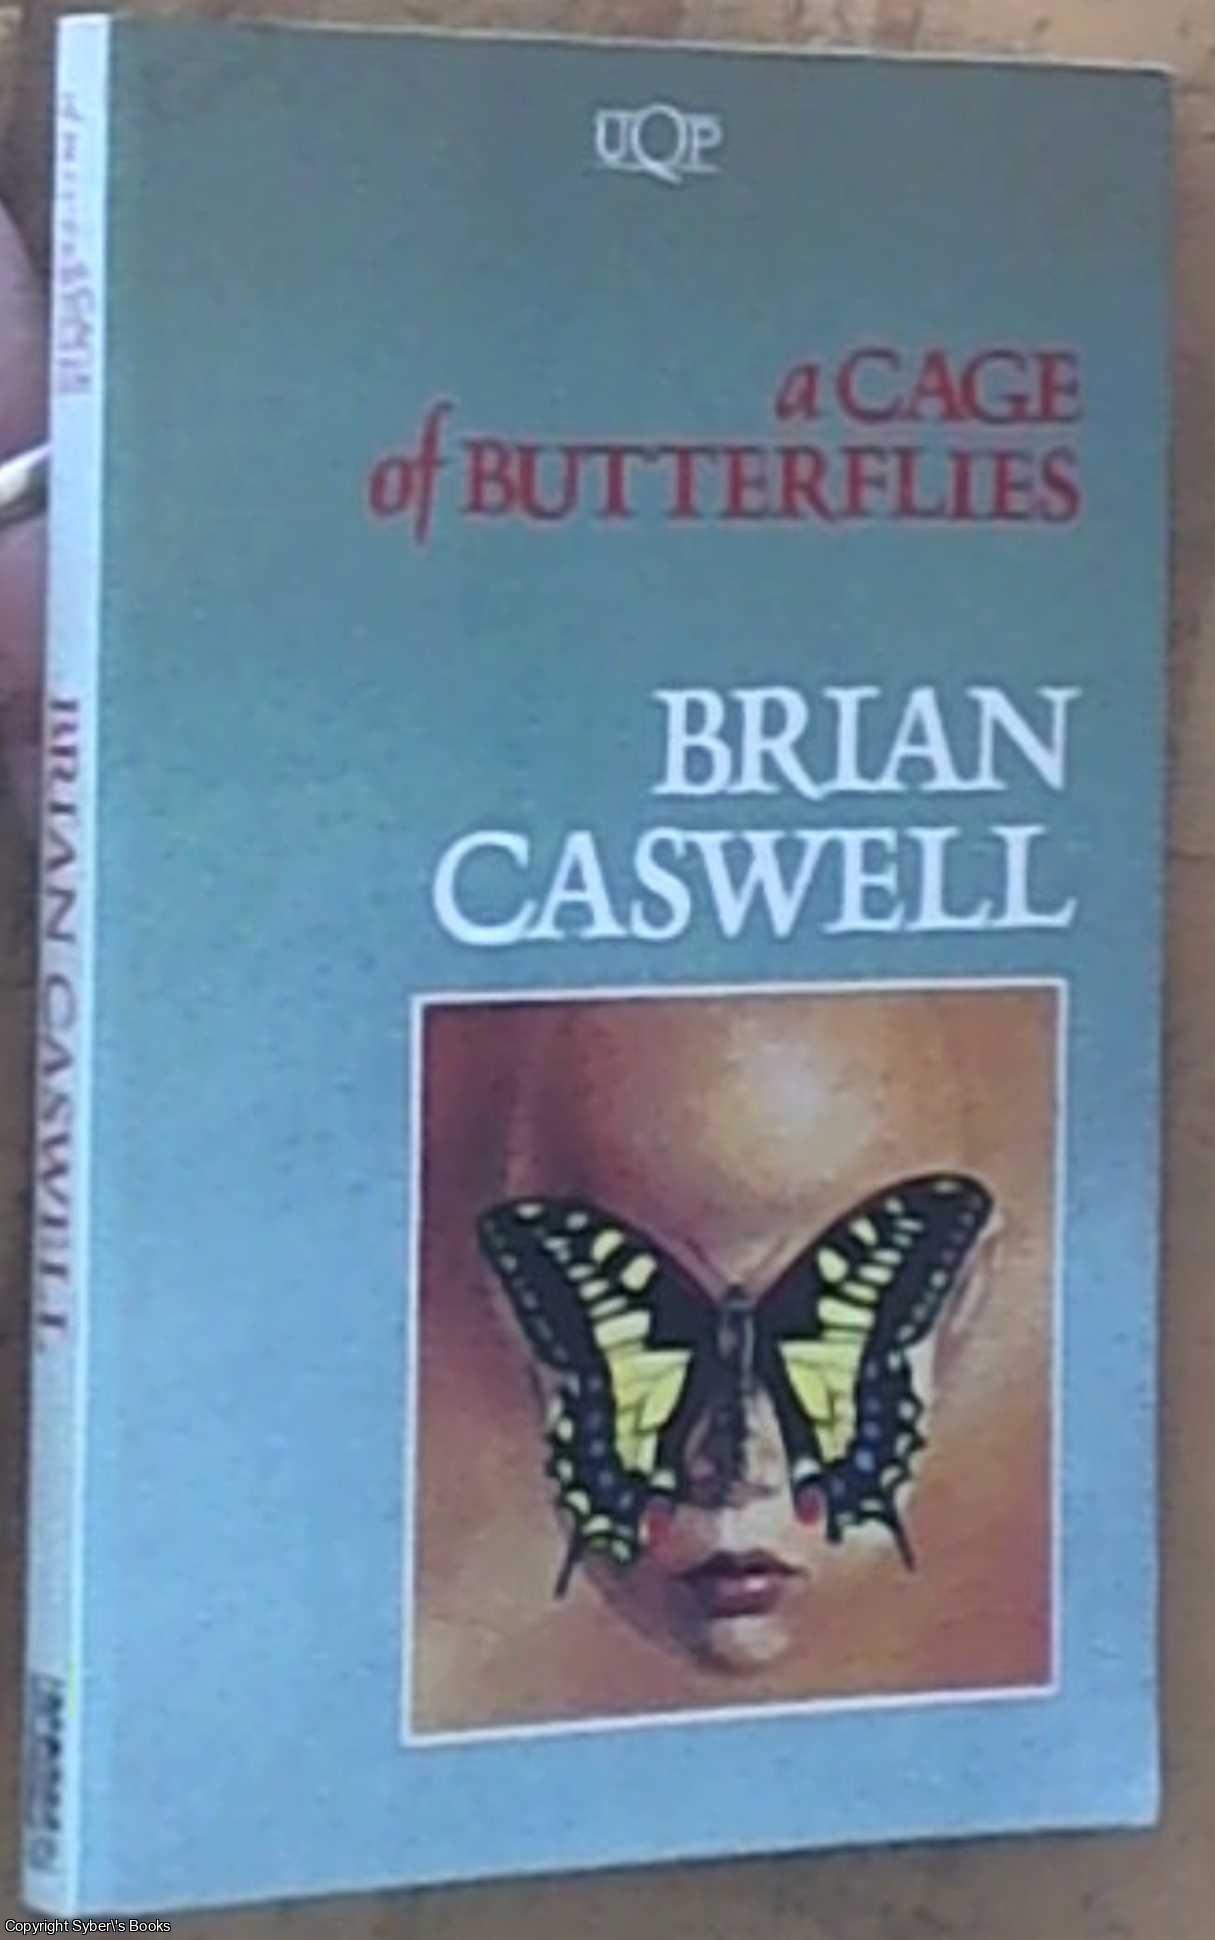 Caswell, Brian - A cage of butterflies